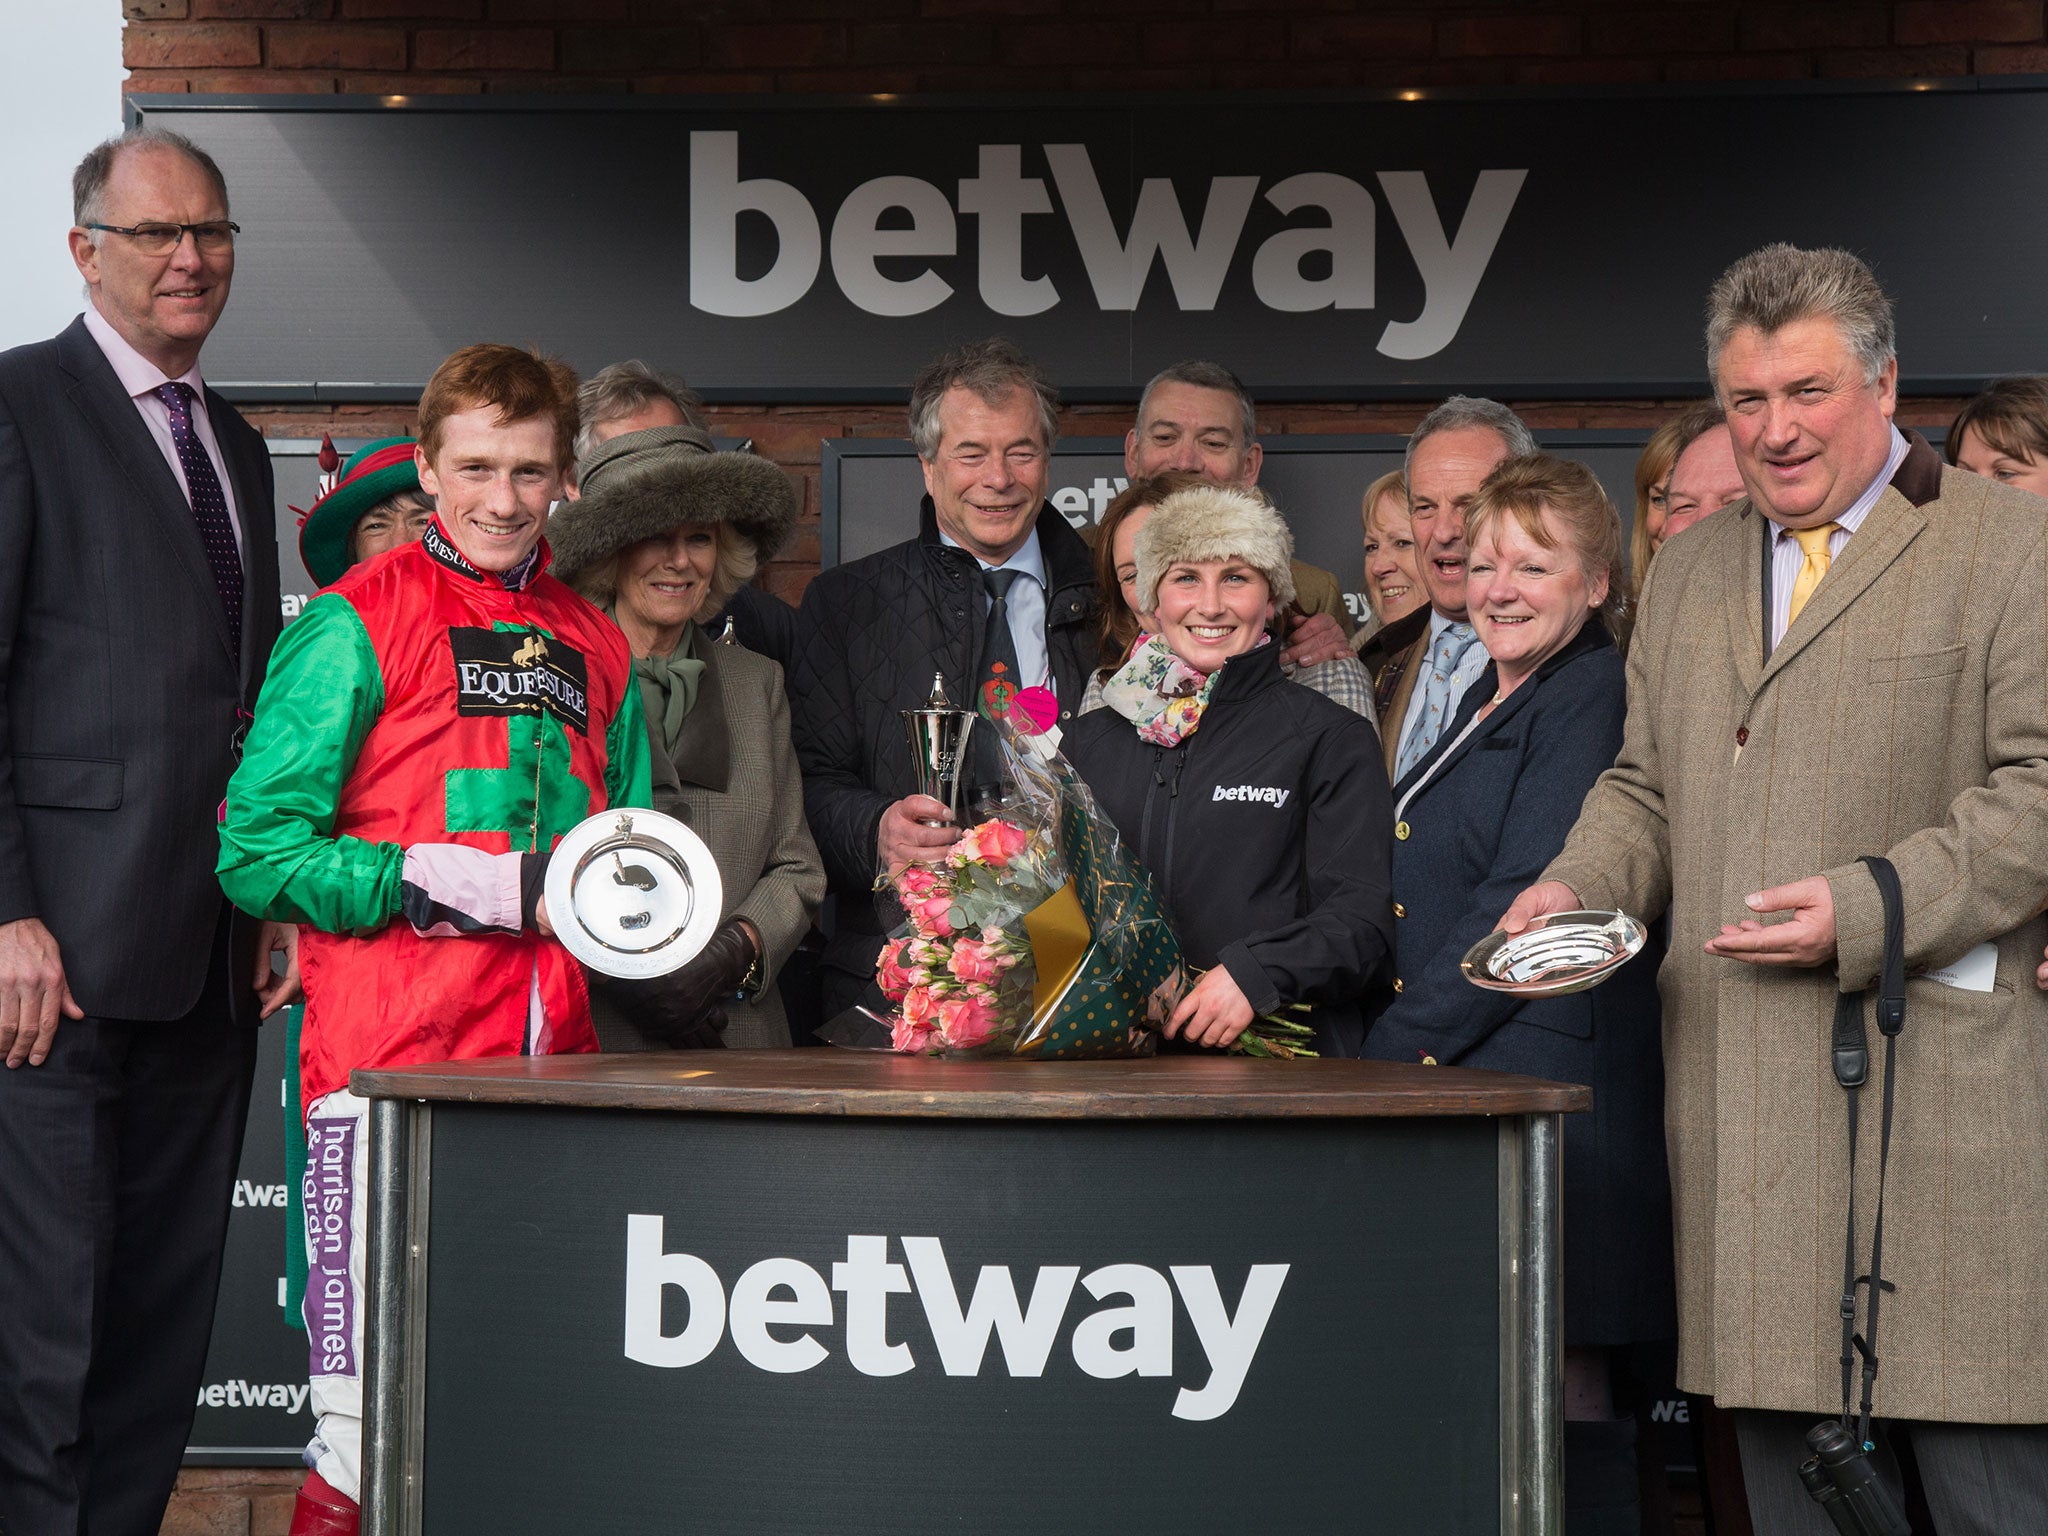 Camilla, Duchess of Cornwall makes a presentation to the owners jockey Sam Twiston-Davies and trainer Paul Nicholls (far left in yellow tie) of the winning horse in the Betway Queen Mother Champion Steeple Chase